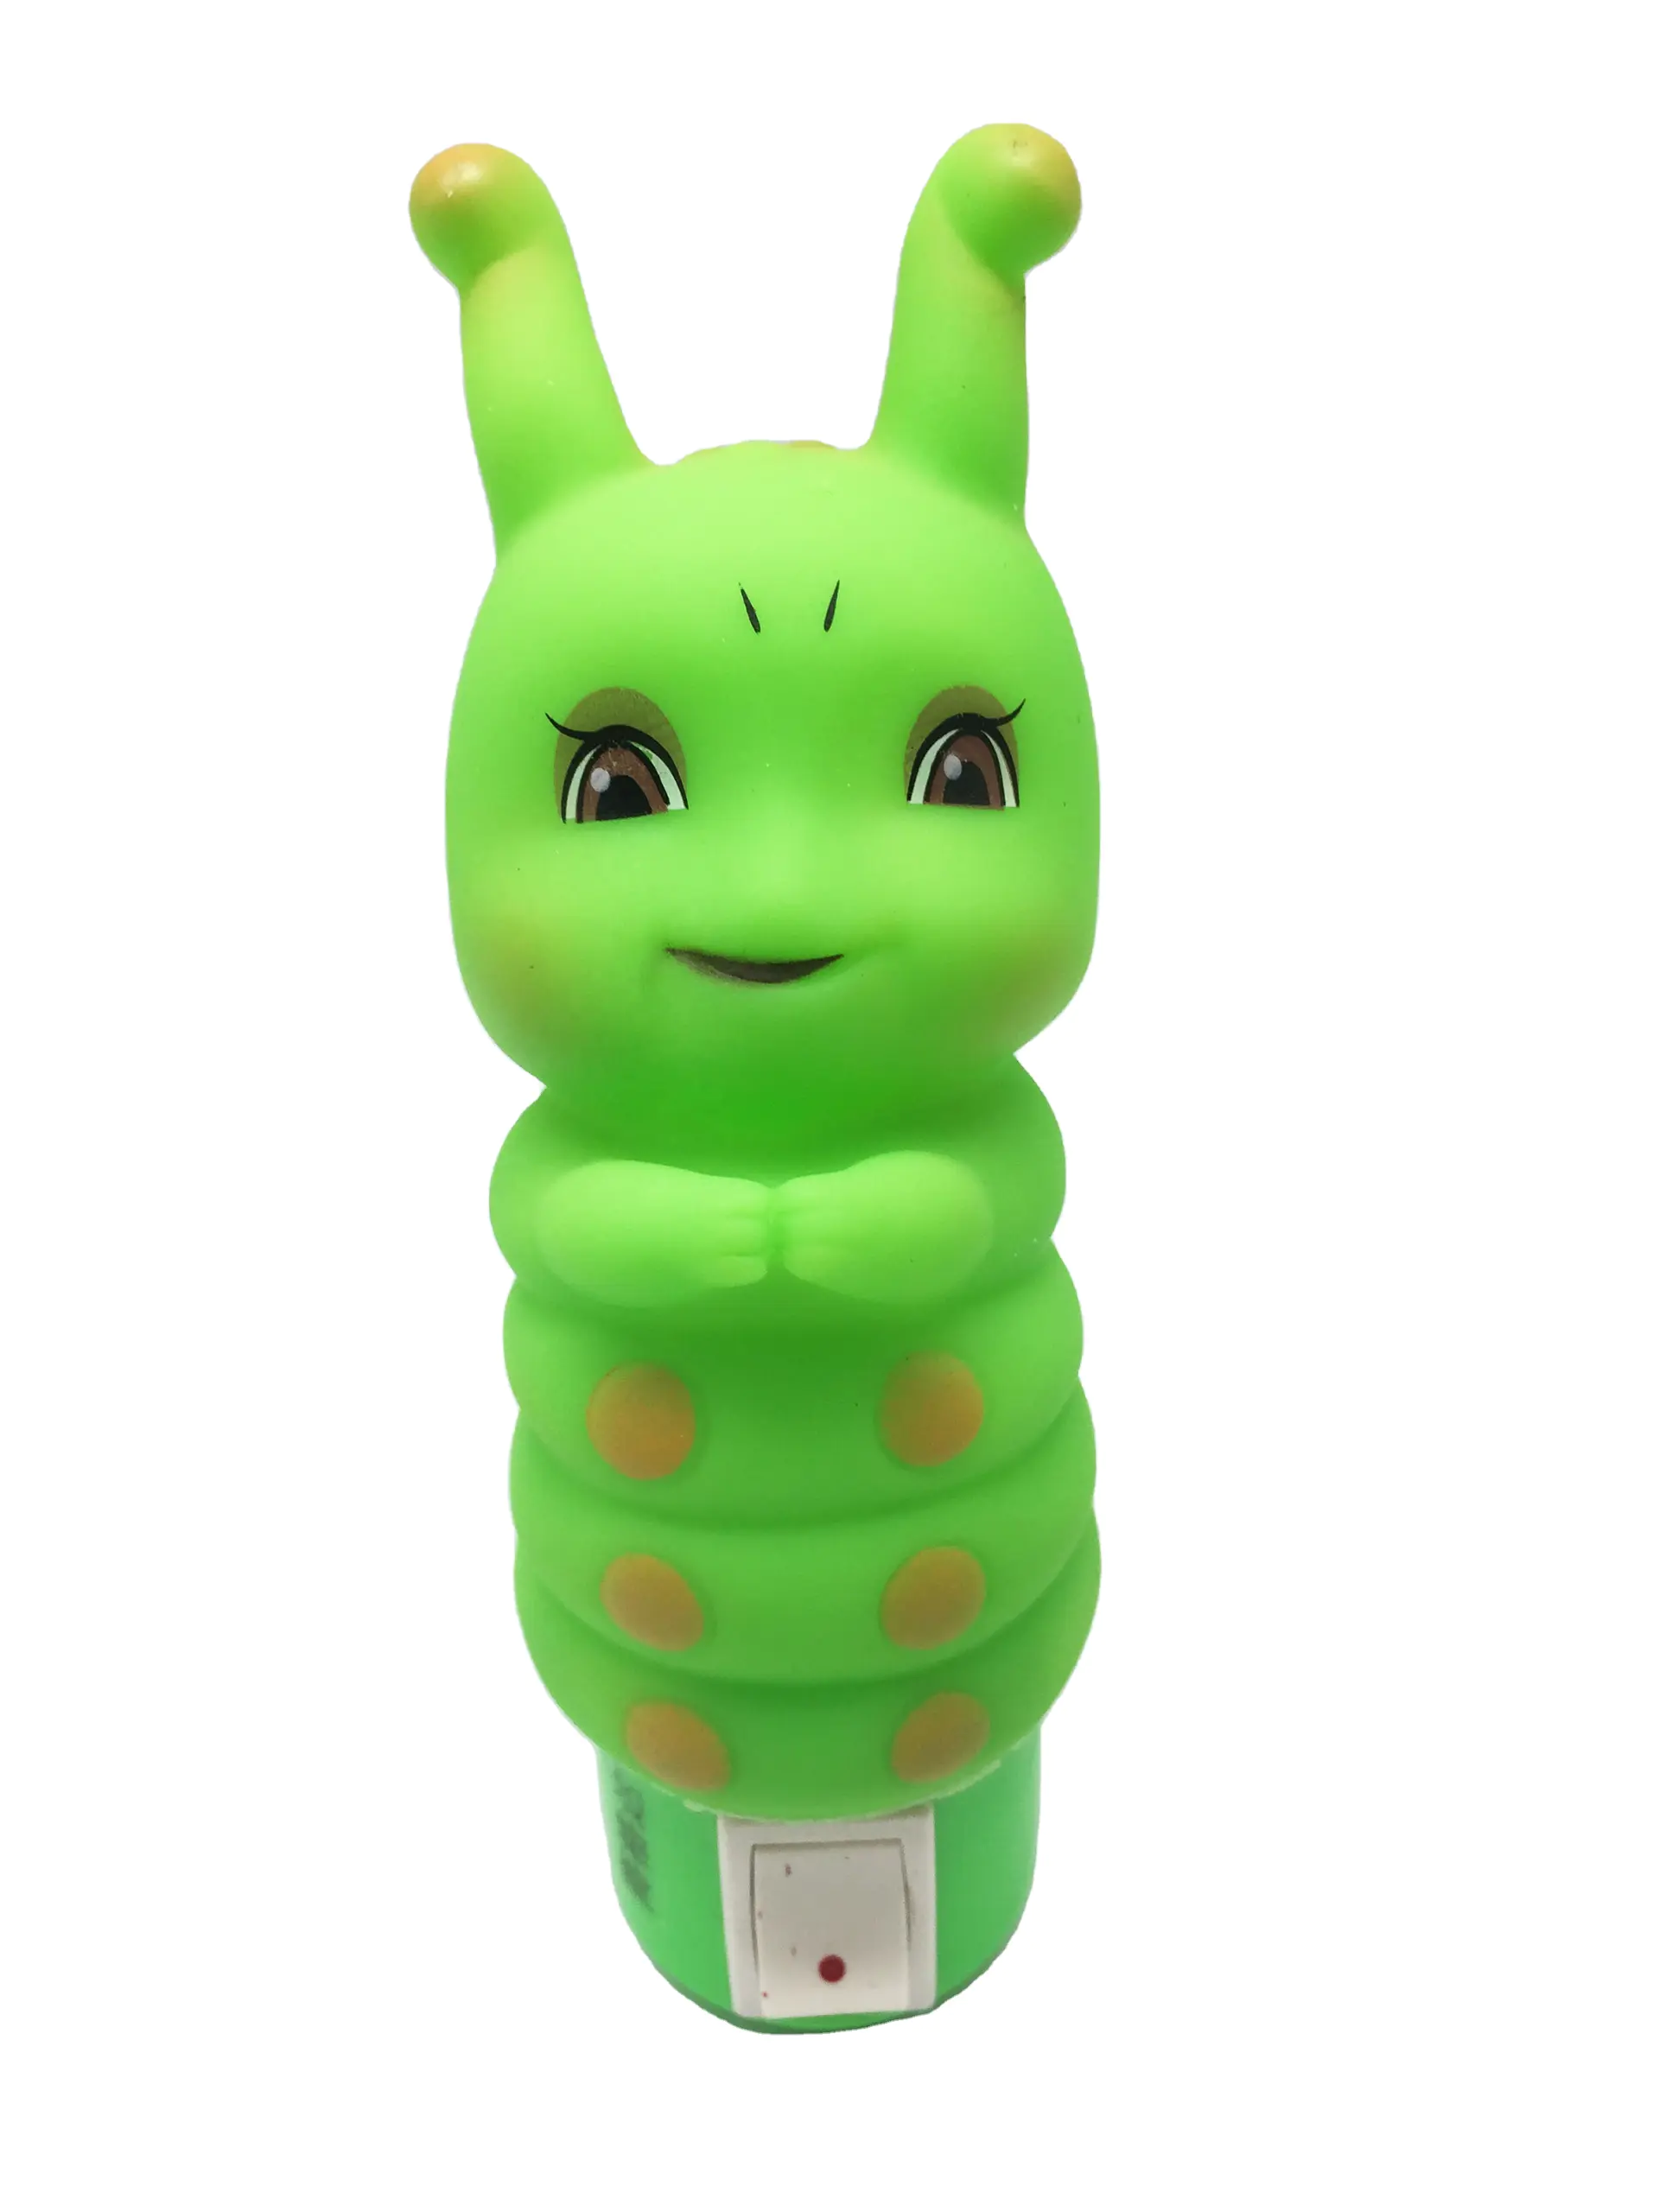 W039 Soft cute Caterpillar silicone shape LED SMD mini switch plug in night light with AC 110V 220V